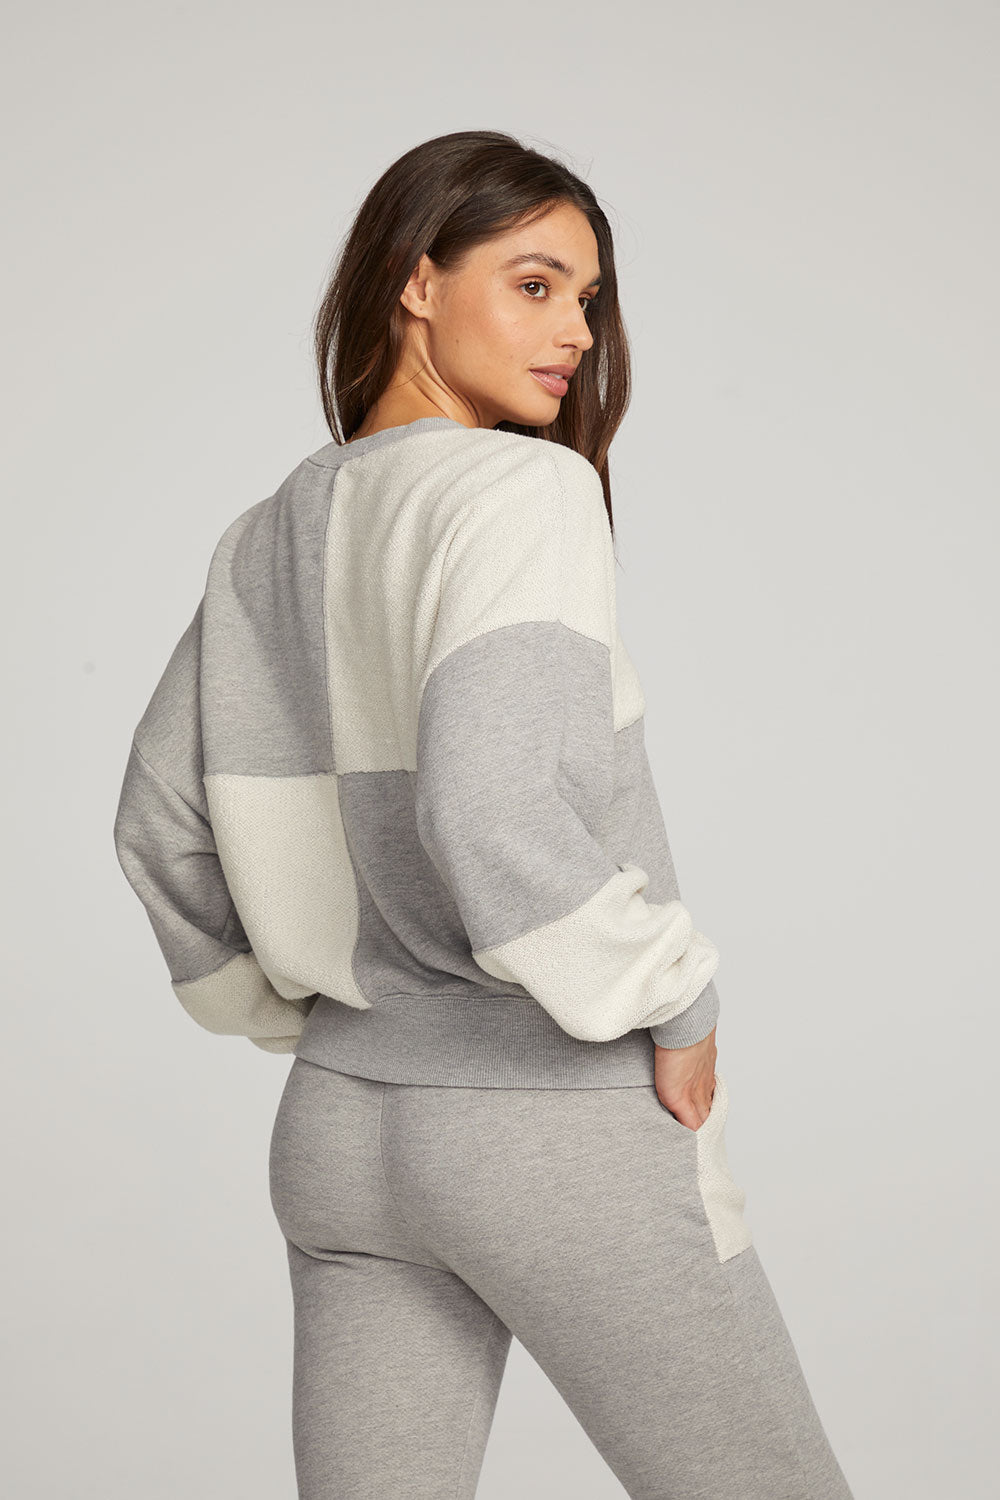 Marie Heather Grey Pullover WOMENS chaserbrand